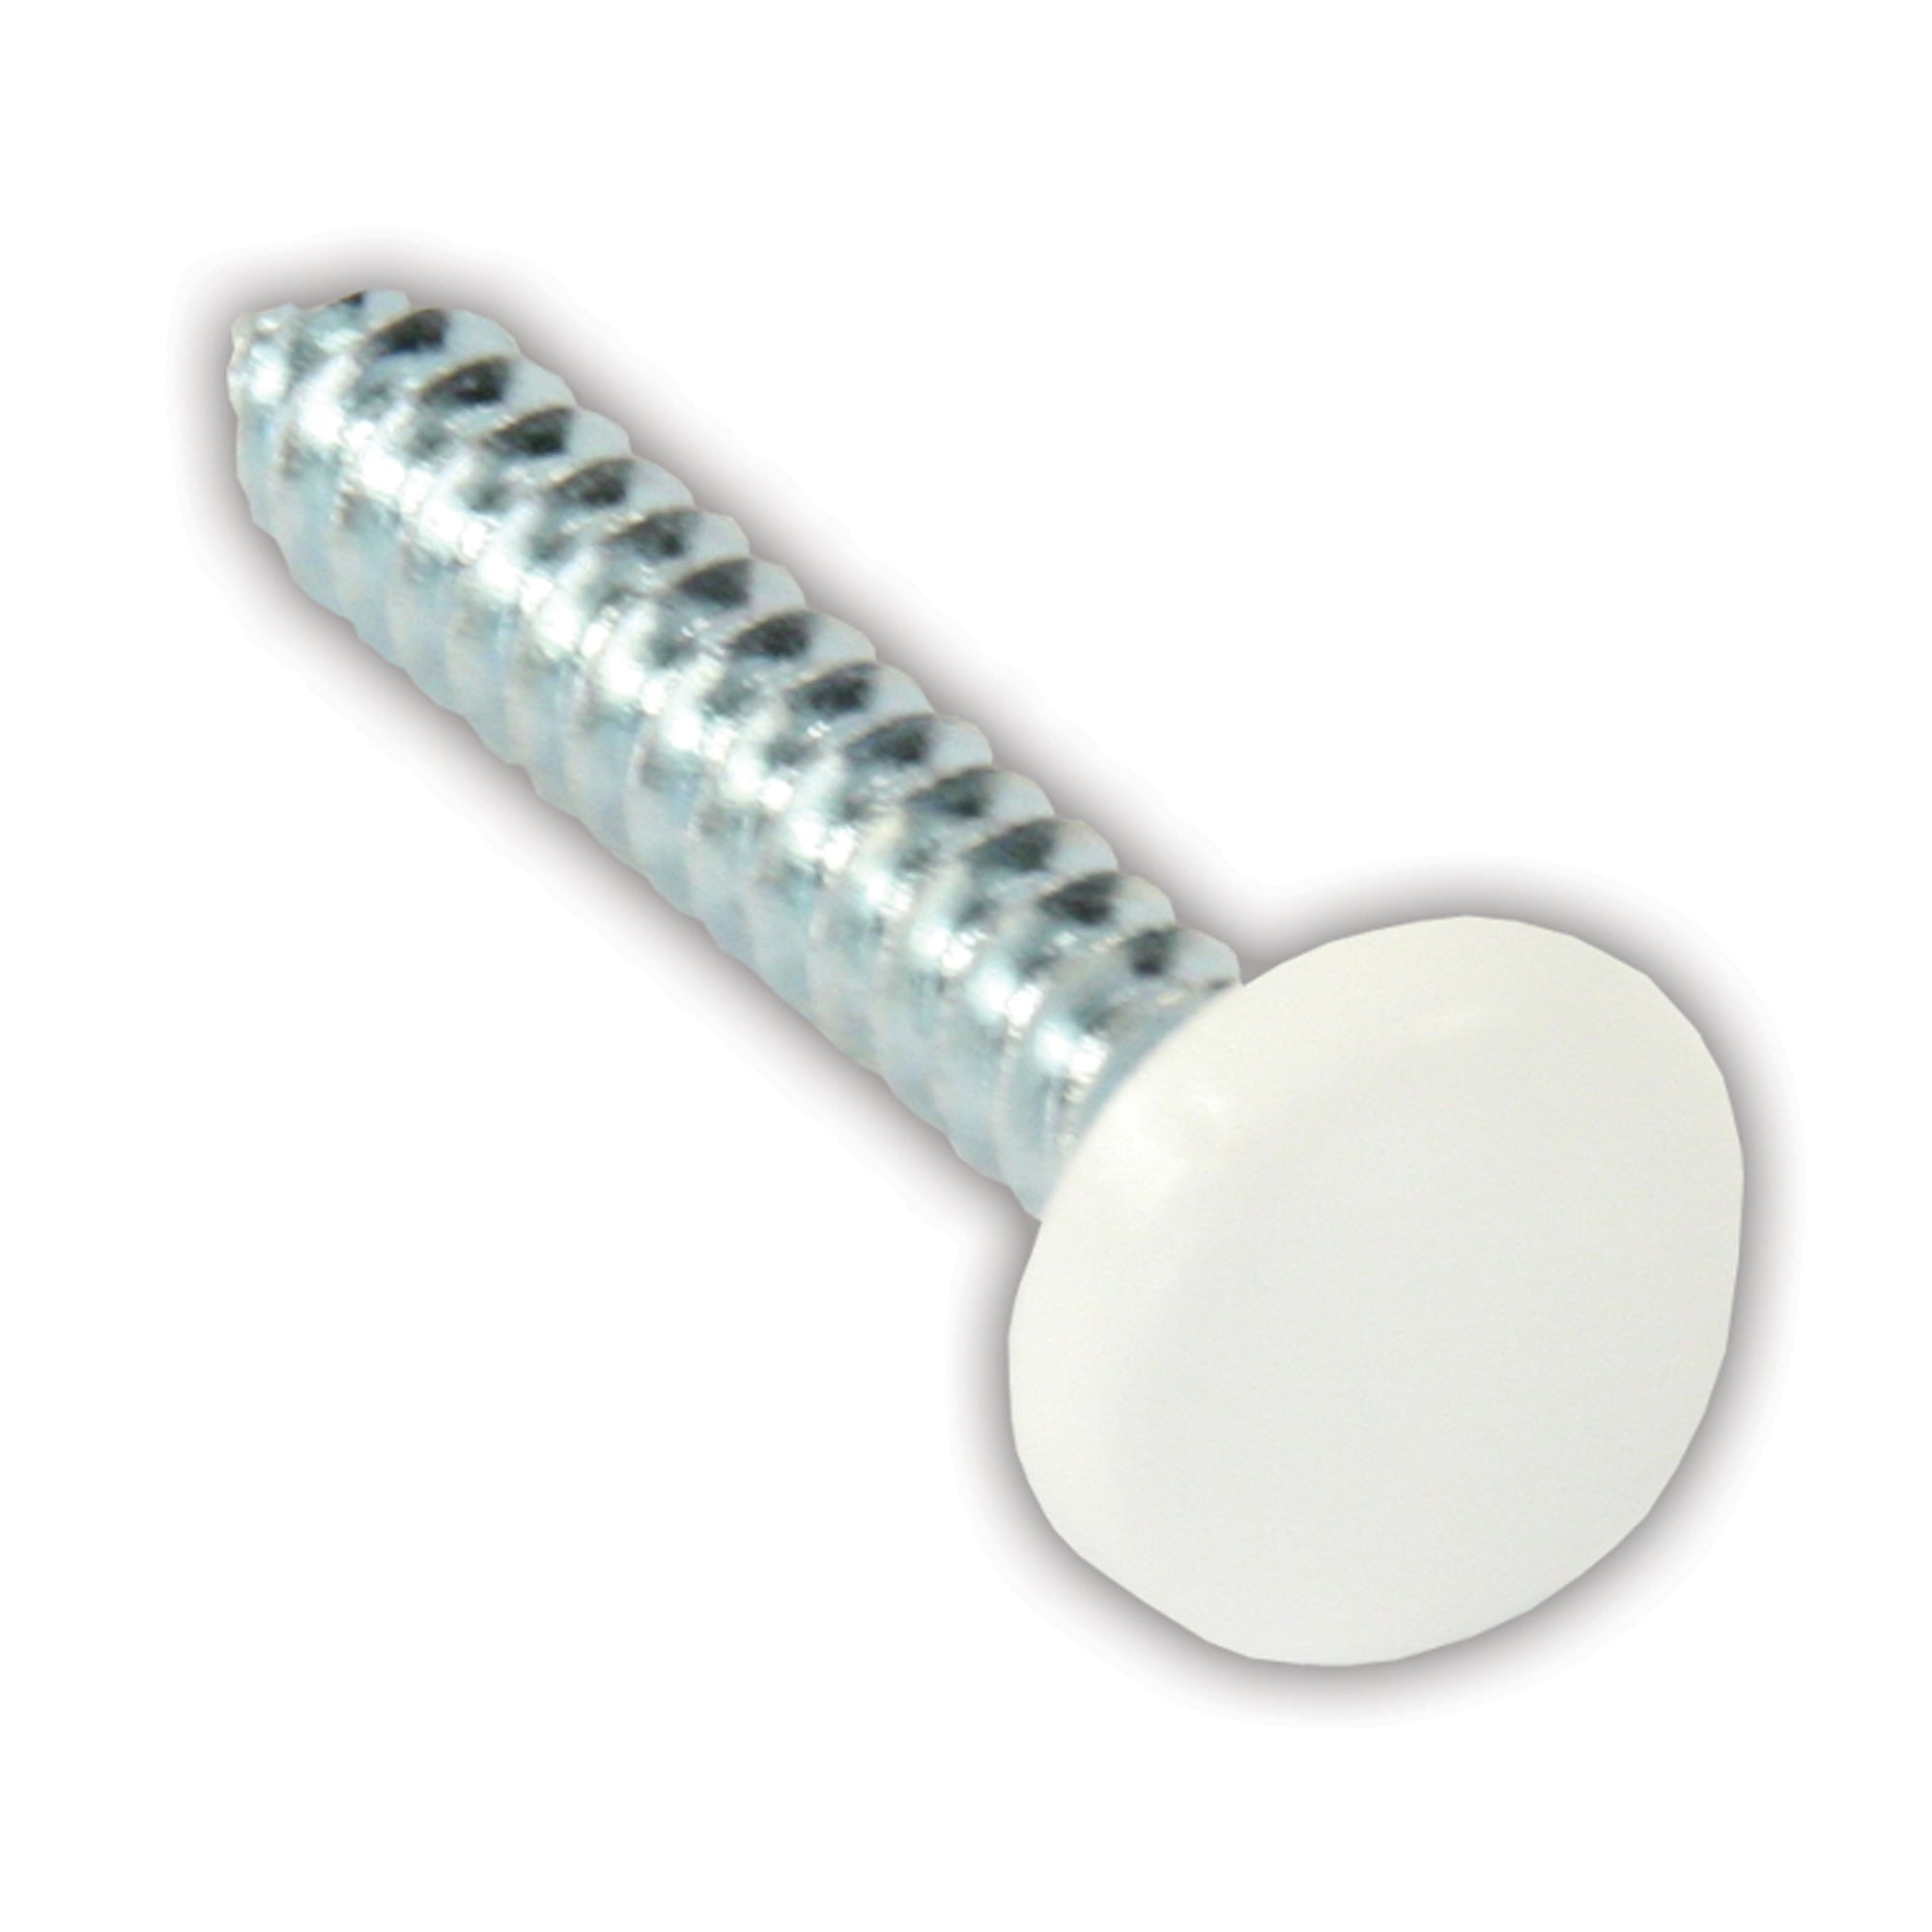 JR Products 20415 Kappet Screws with Covers, Pack of 14 - White